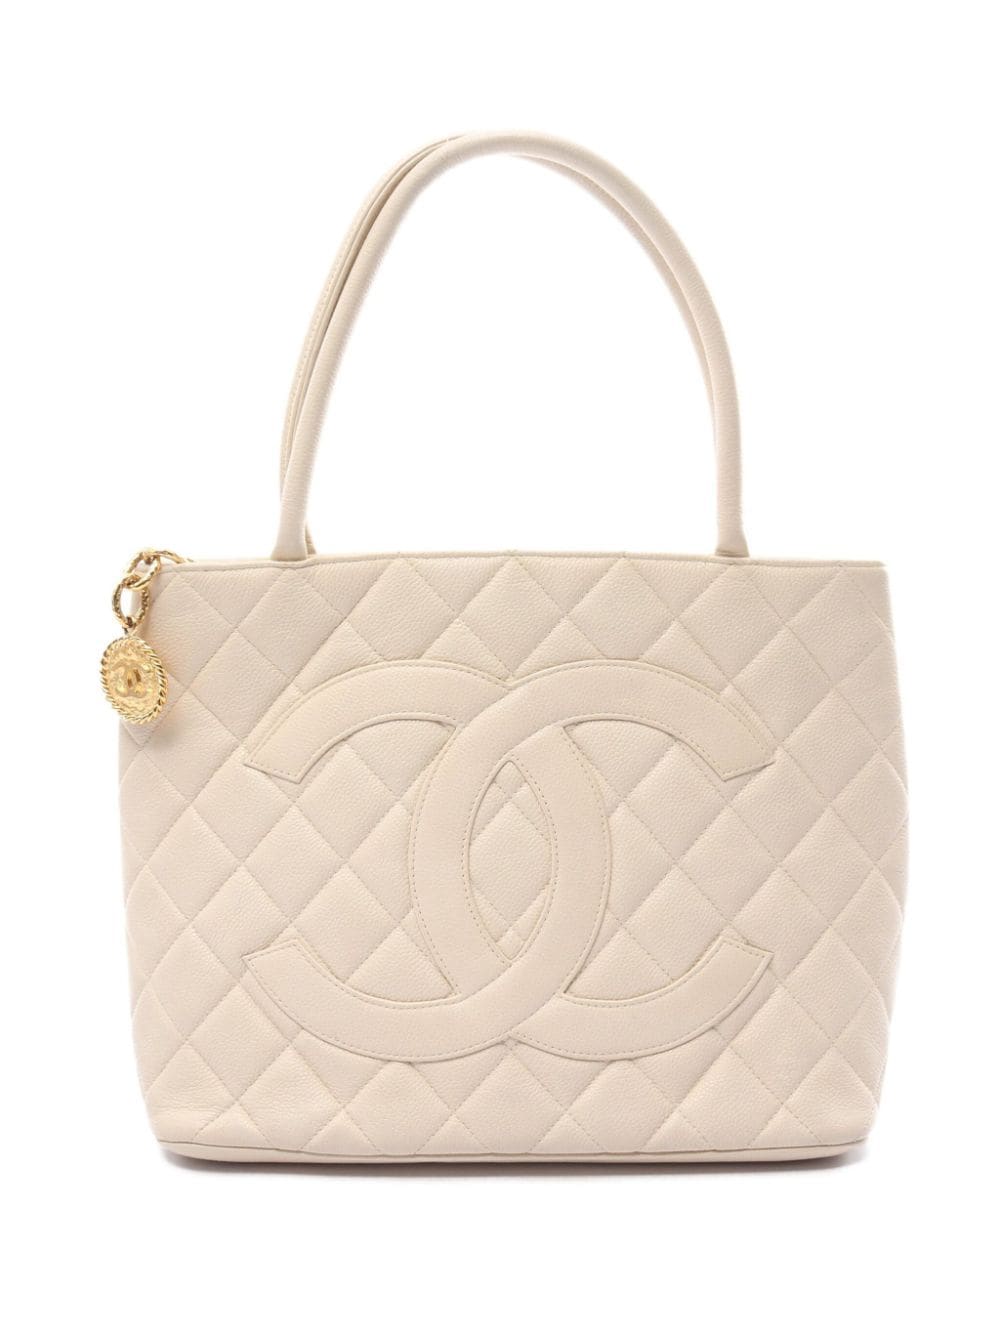 Pre-owned Chanel 1196-1997 Medallion Leather Tote Bag In Neutrals